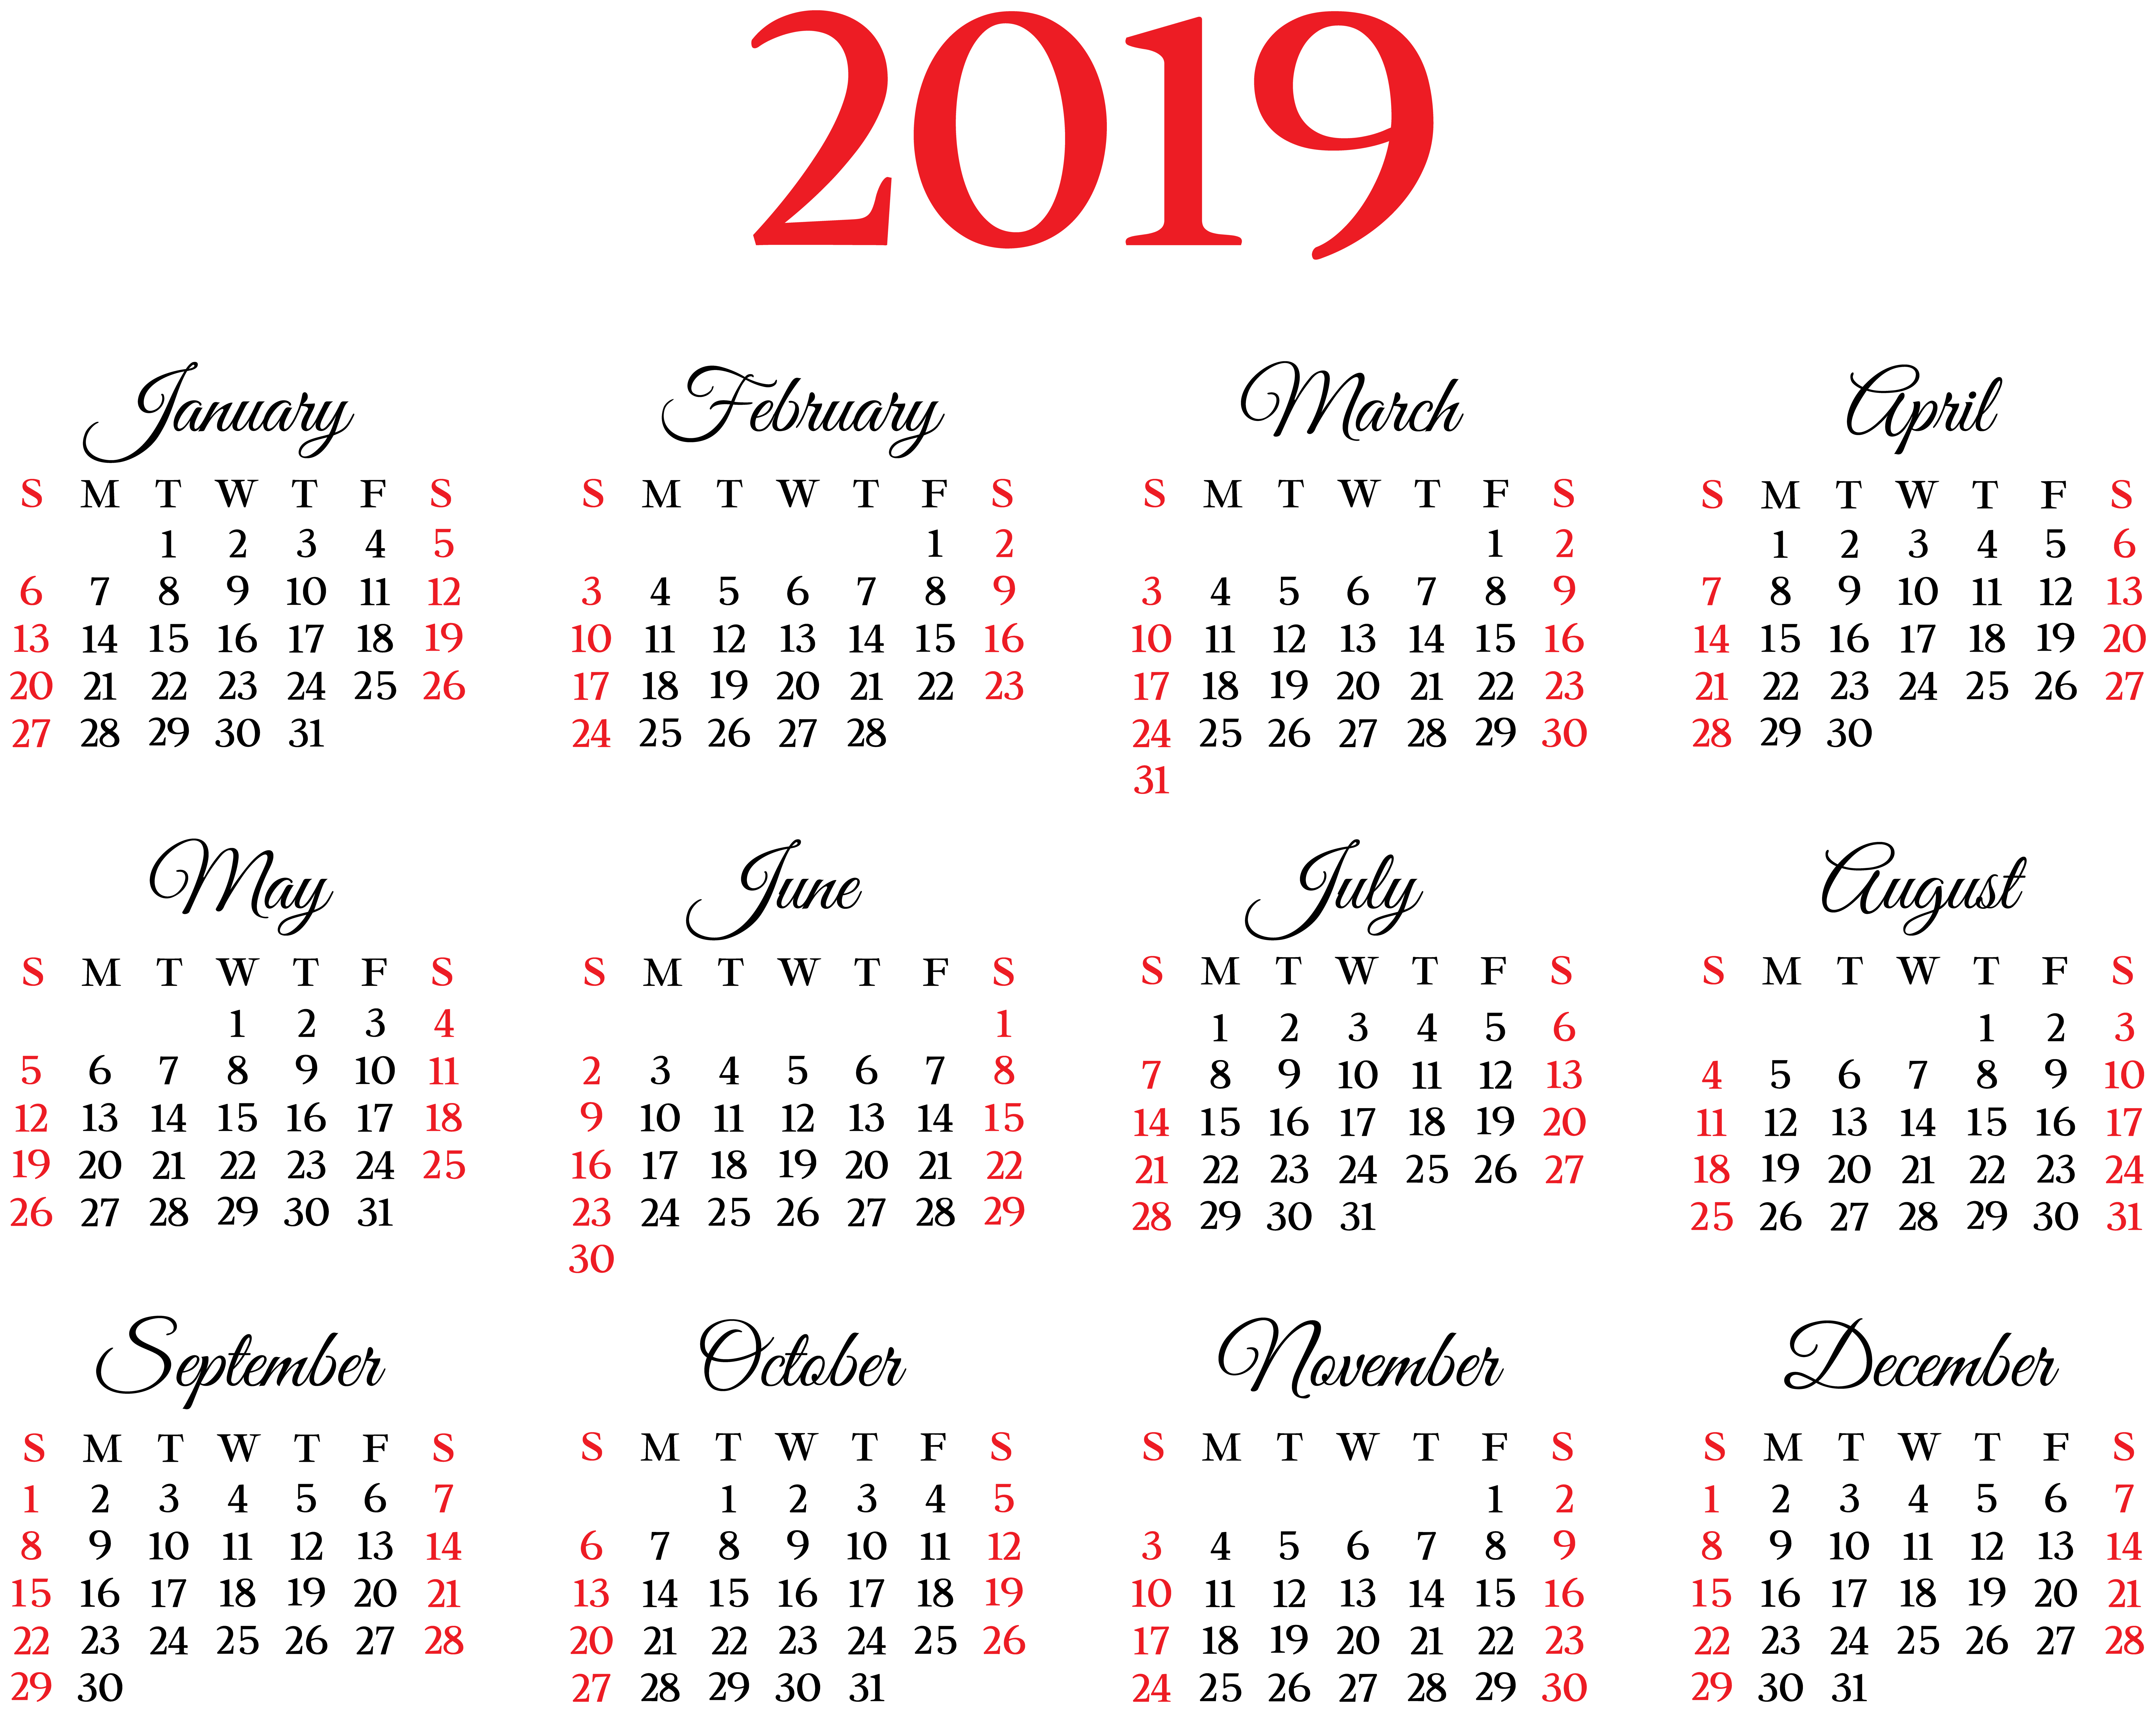 General 8000x6352 calendar 2019 (year) month numbers transparent background black red simple background black background